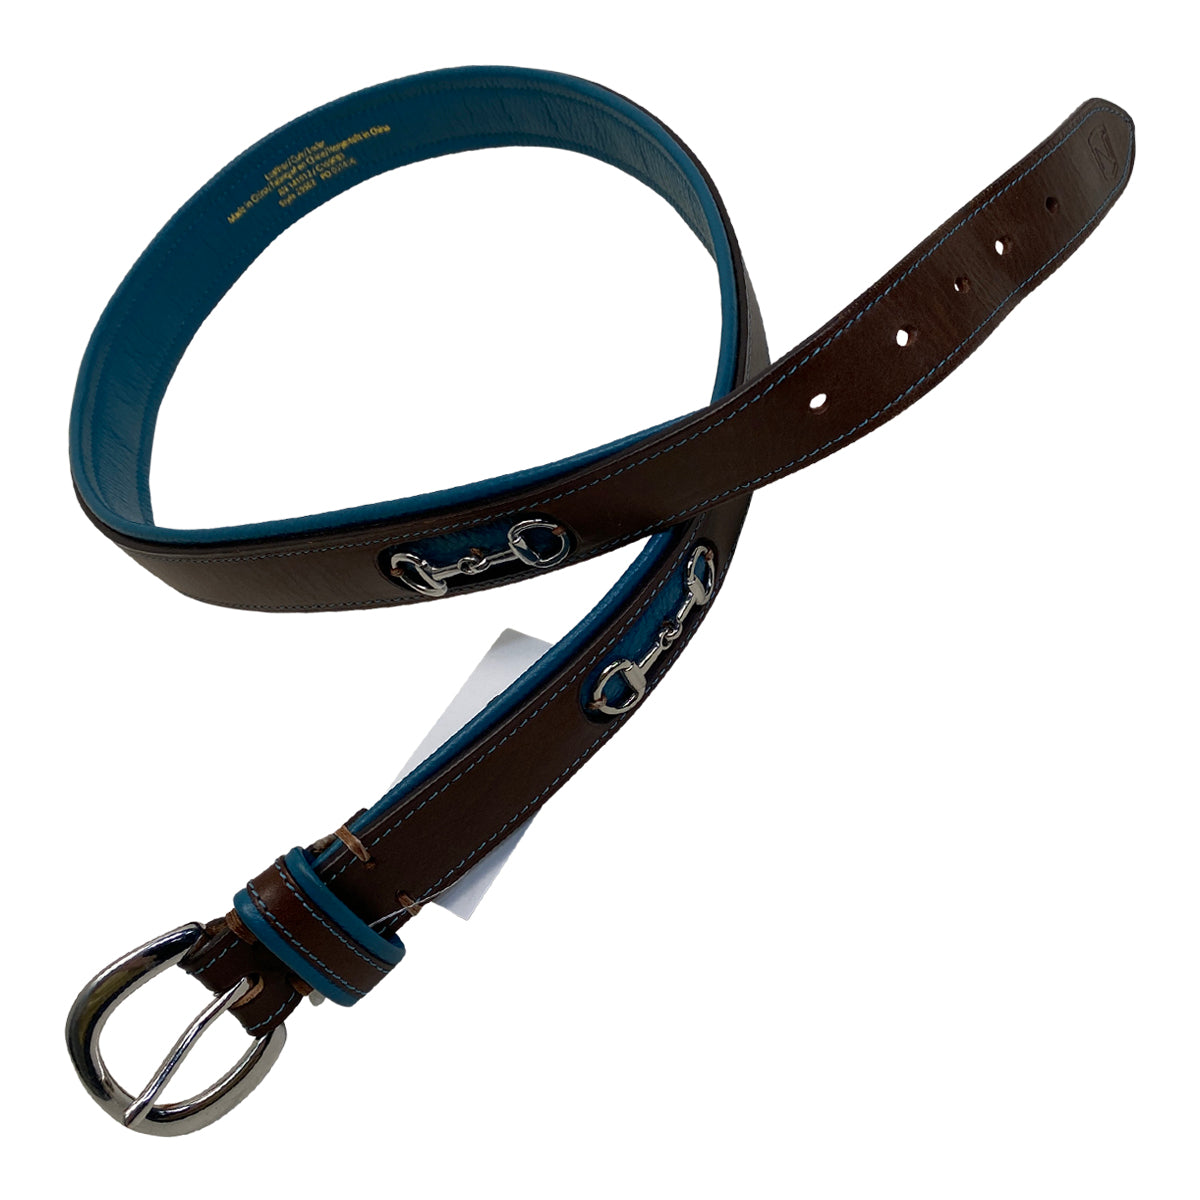 Noble Outfitters 'On the Bit' Leather Belt in Brown/Teal